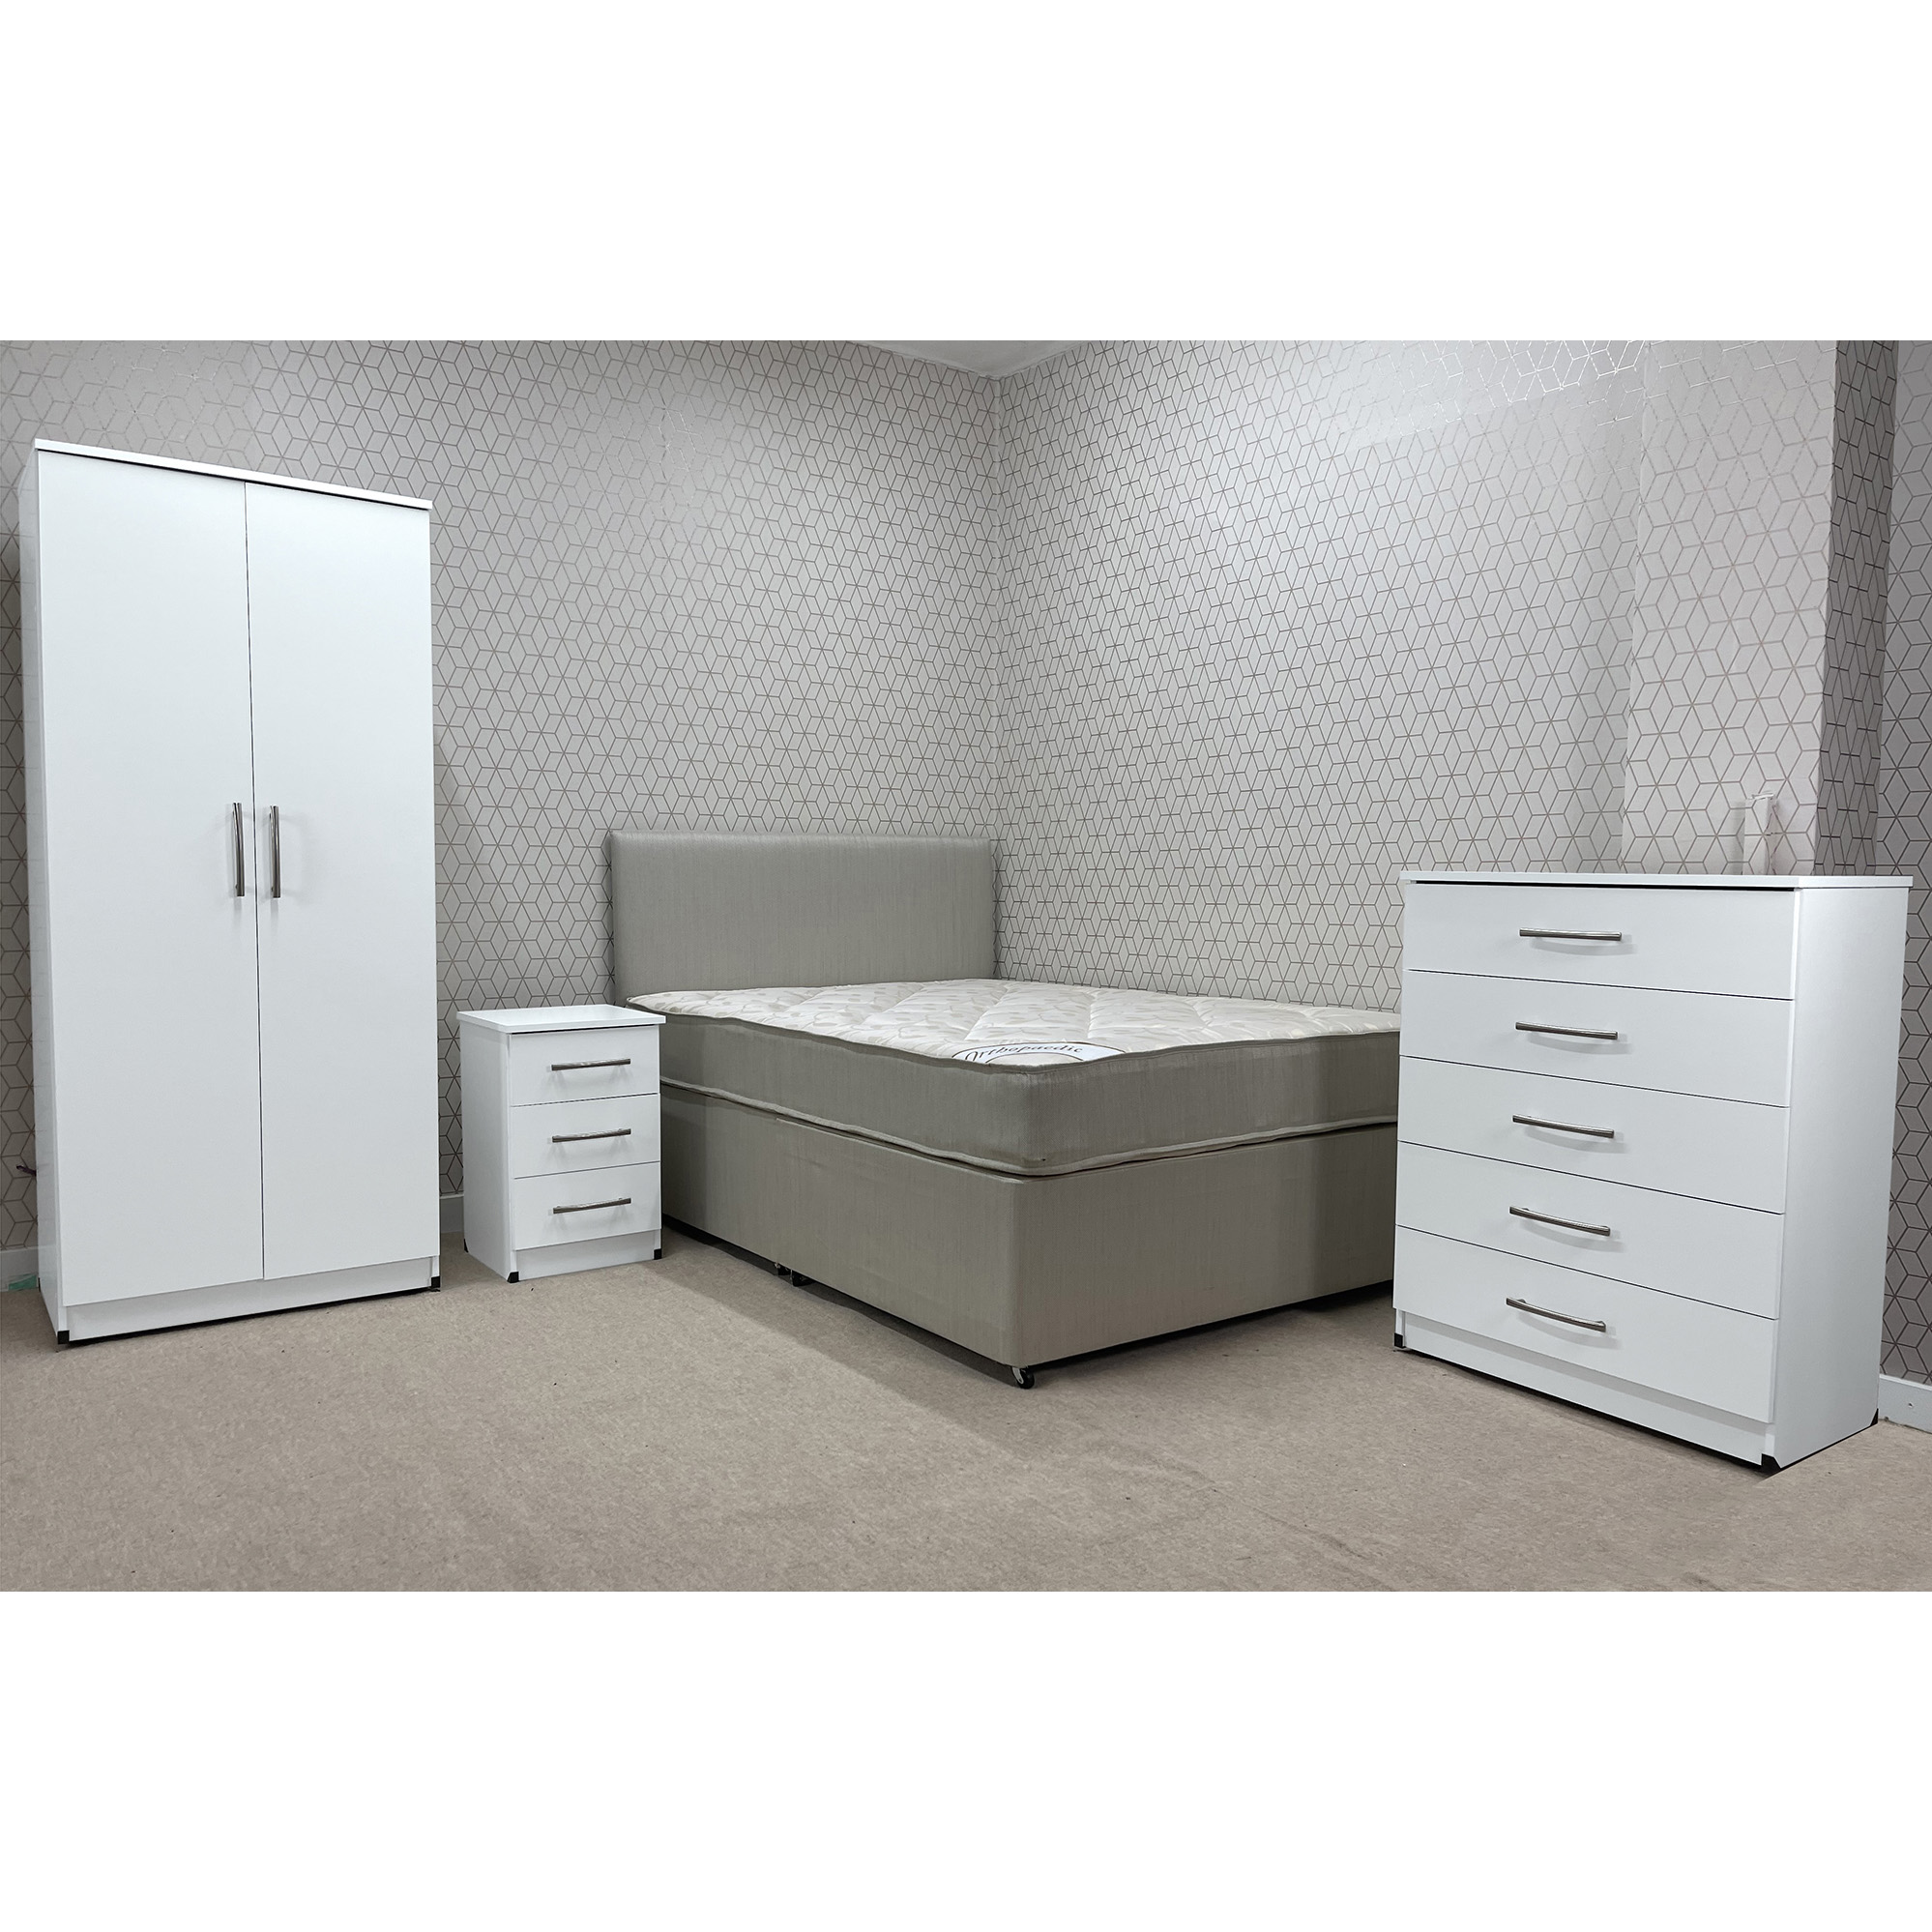 HMO furniture package - landlord Furniture package